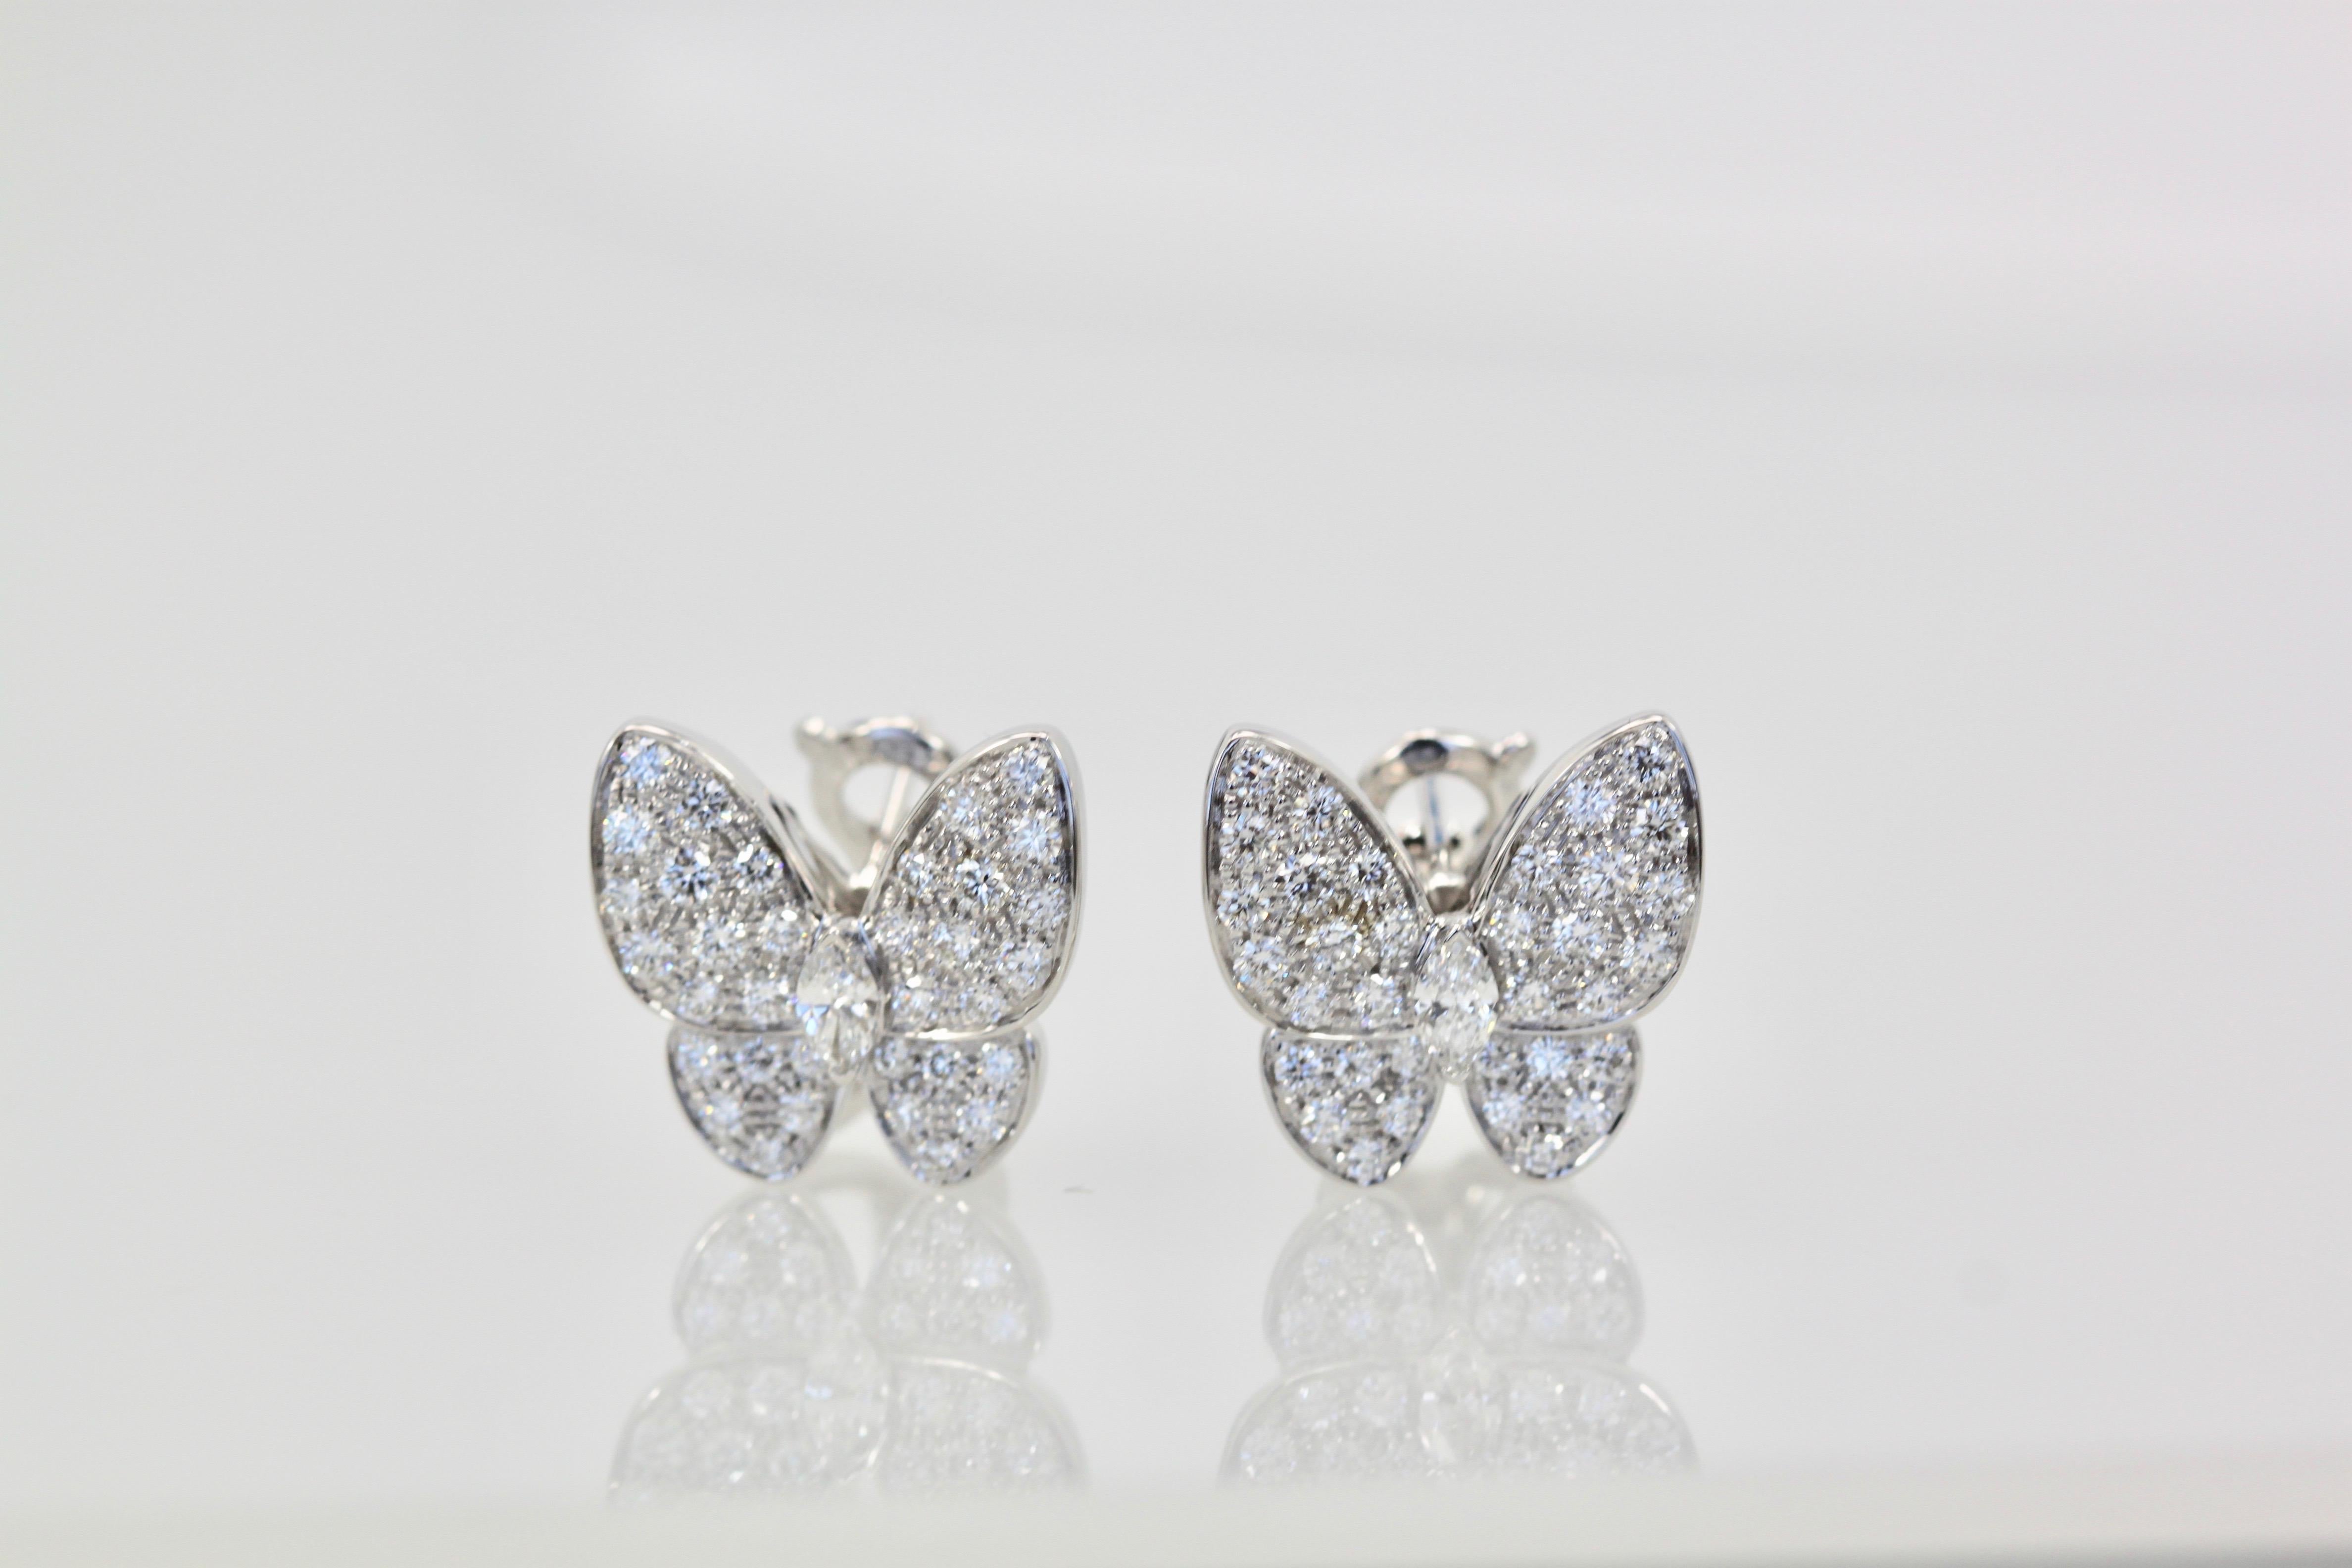 These gorgeous VCA white diamond butterfly earrings are made in 18K white gold and feature 70 Diamonds all clarity IF-VVS, color D,E,F  and weighs in at 1.67 carats and retails for $25,800.  Comes with box and certificate